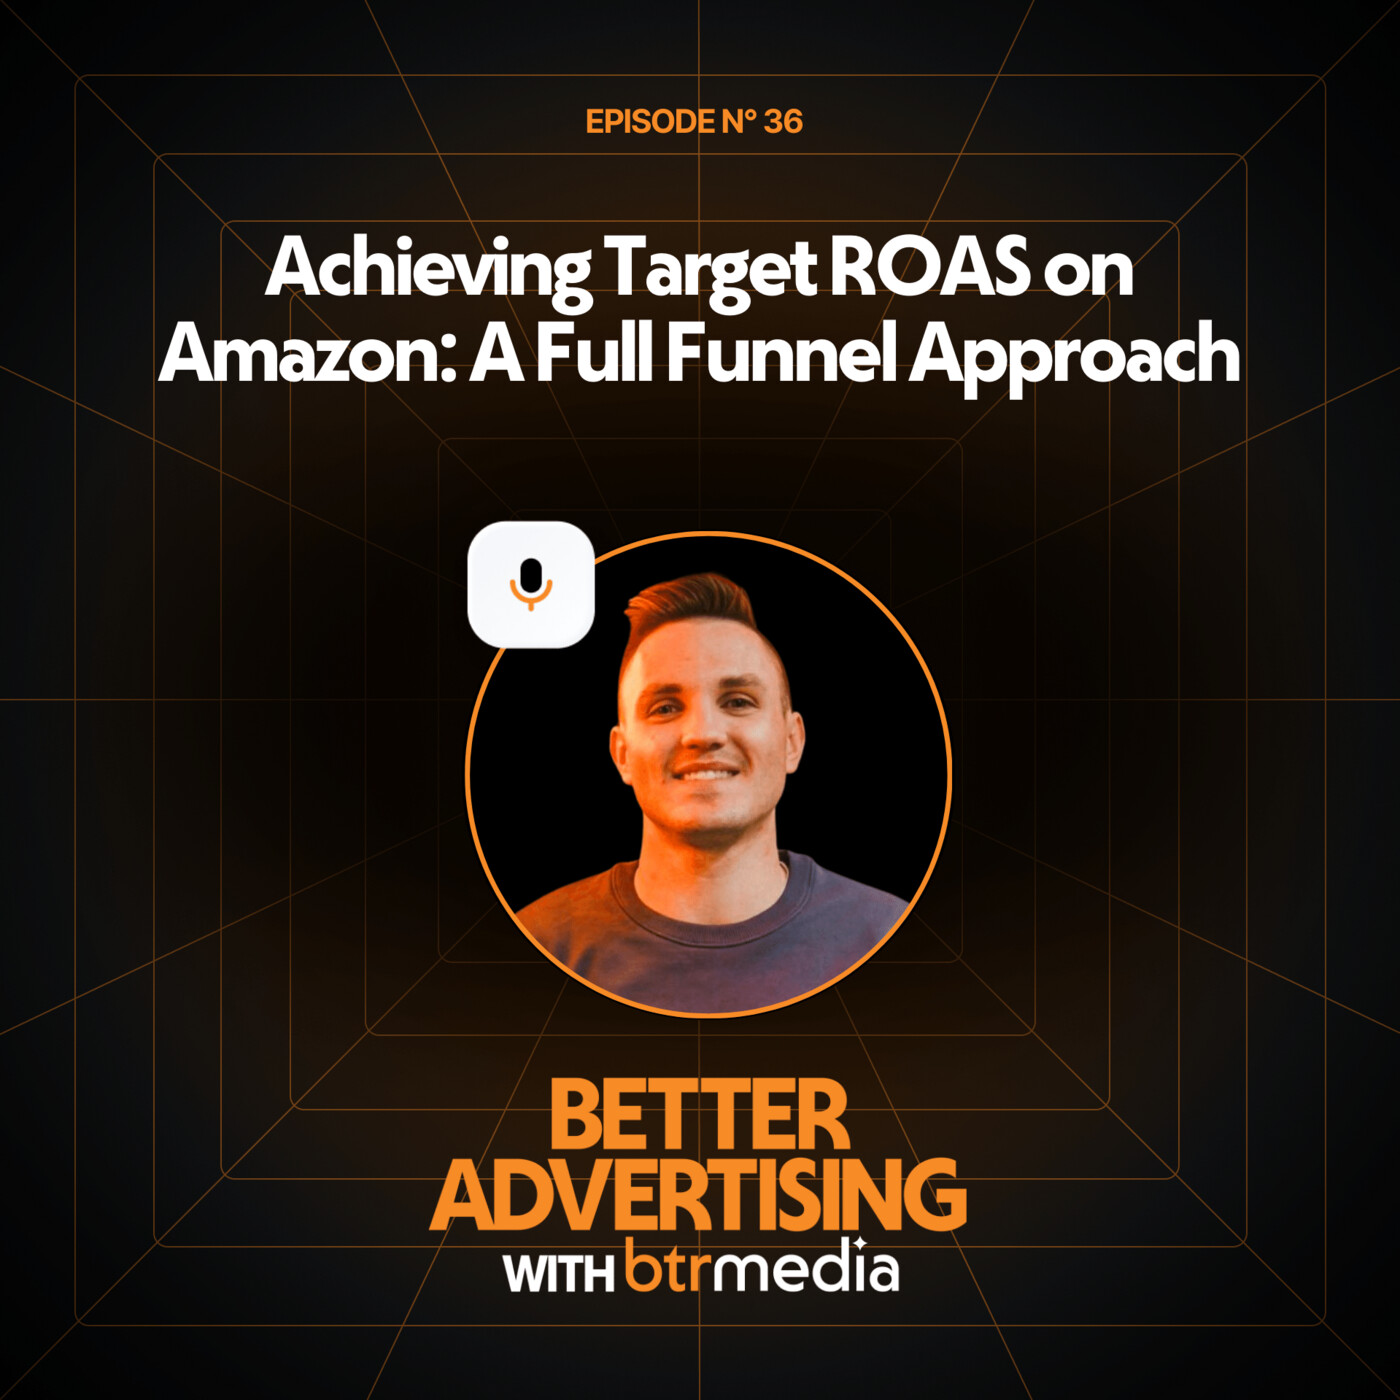 Achieving Target ROAS on Amazon: A Full Funnel Approach